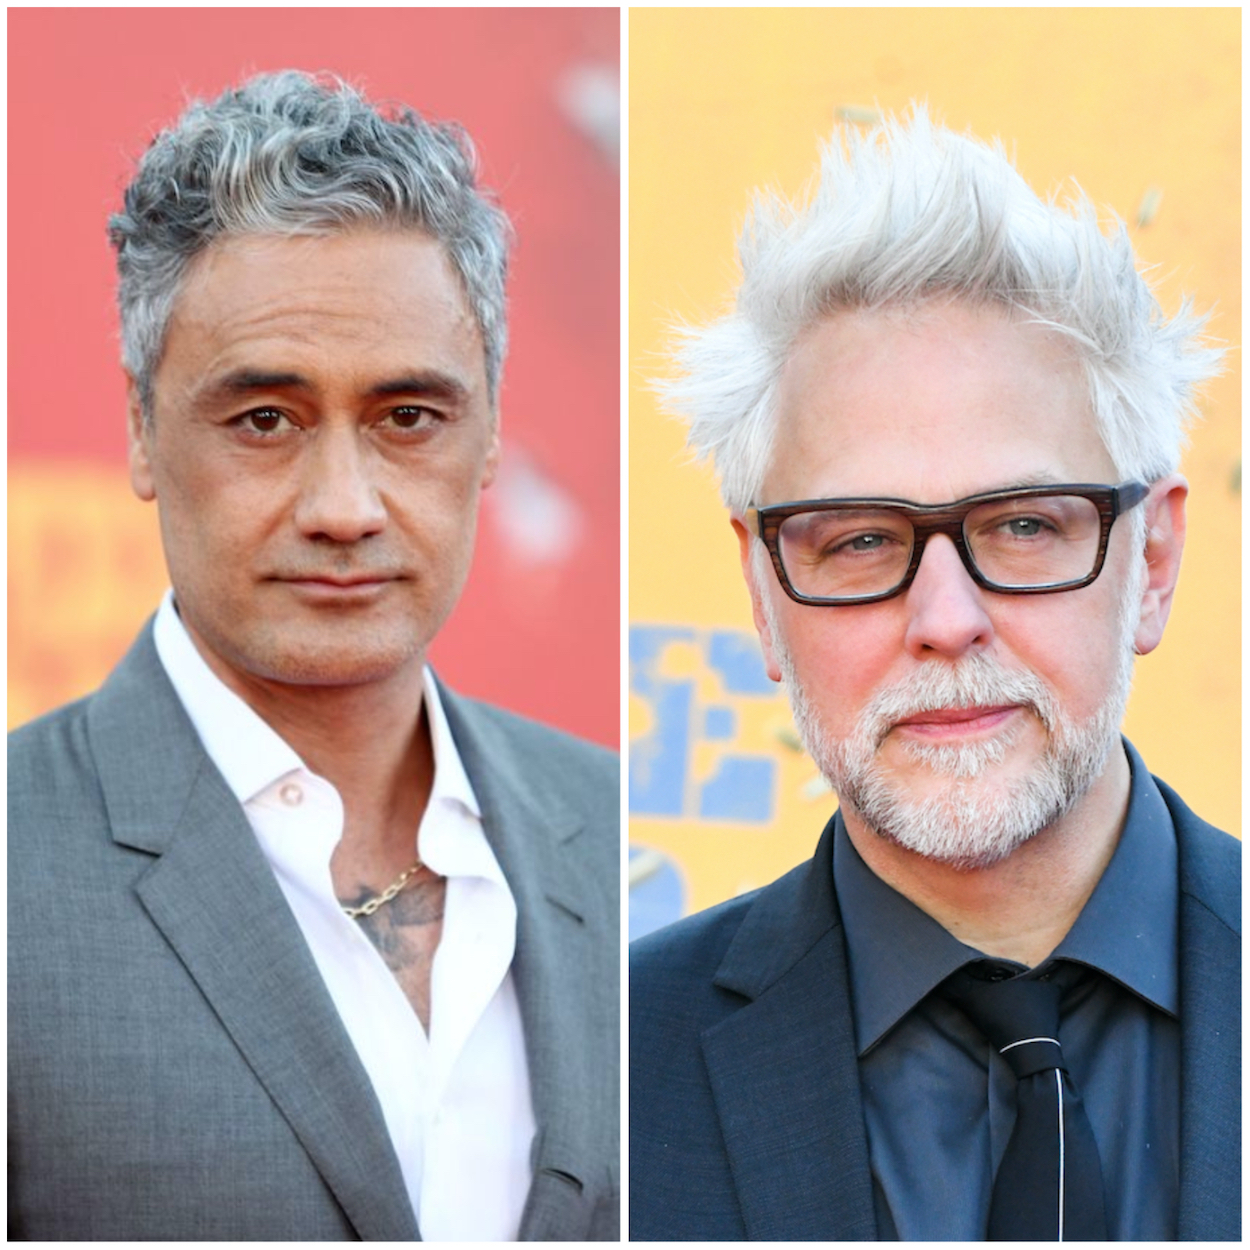 Taika Waititi (left) and James Gunn attend the premiere of 'The Suicide Squad' in 2021. Waititi humorously explained how he and Gunn differ as directors by saying Gunn "just knows what he's doing."